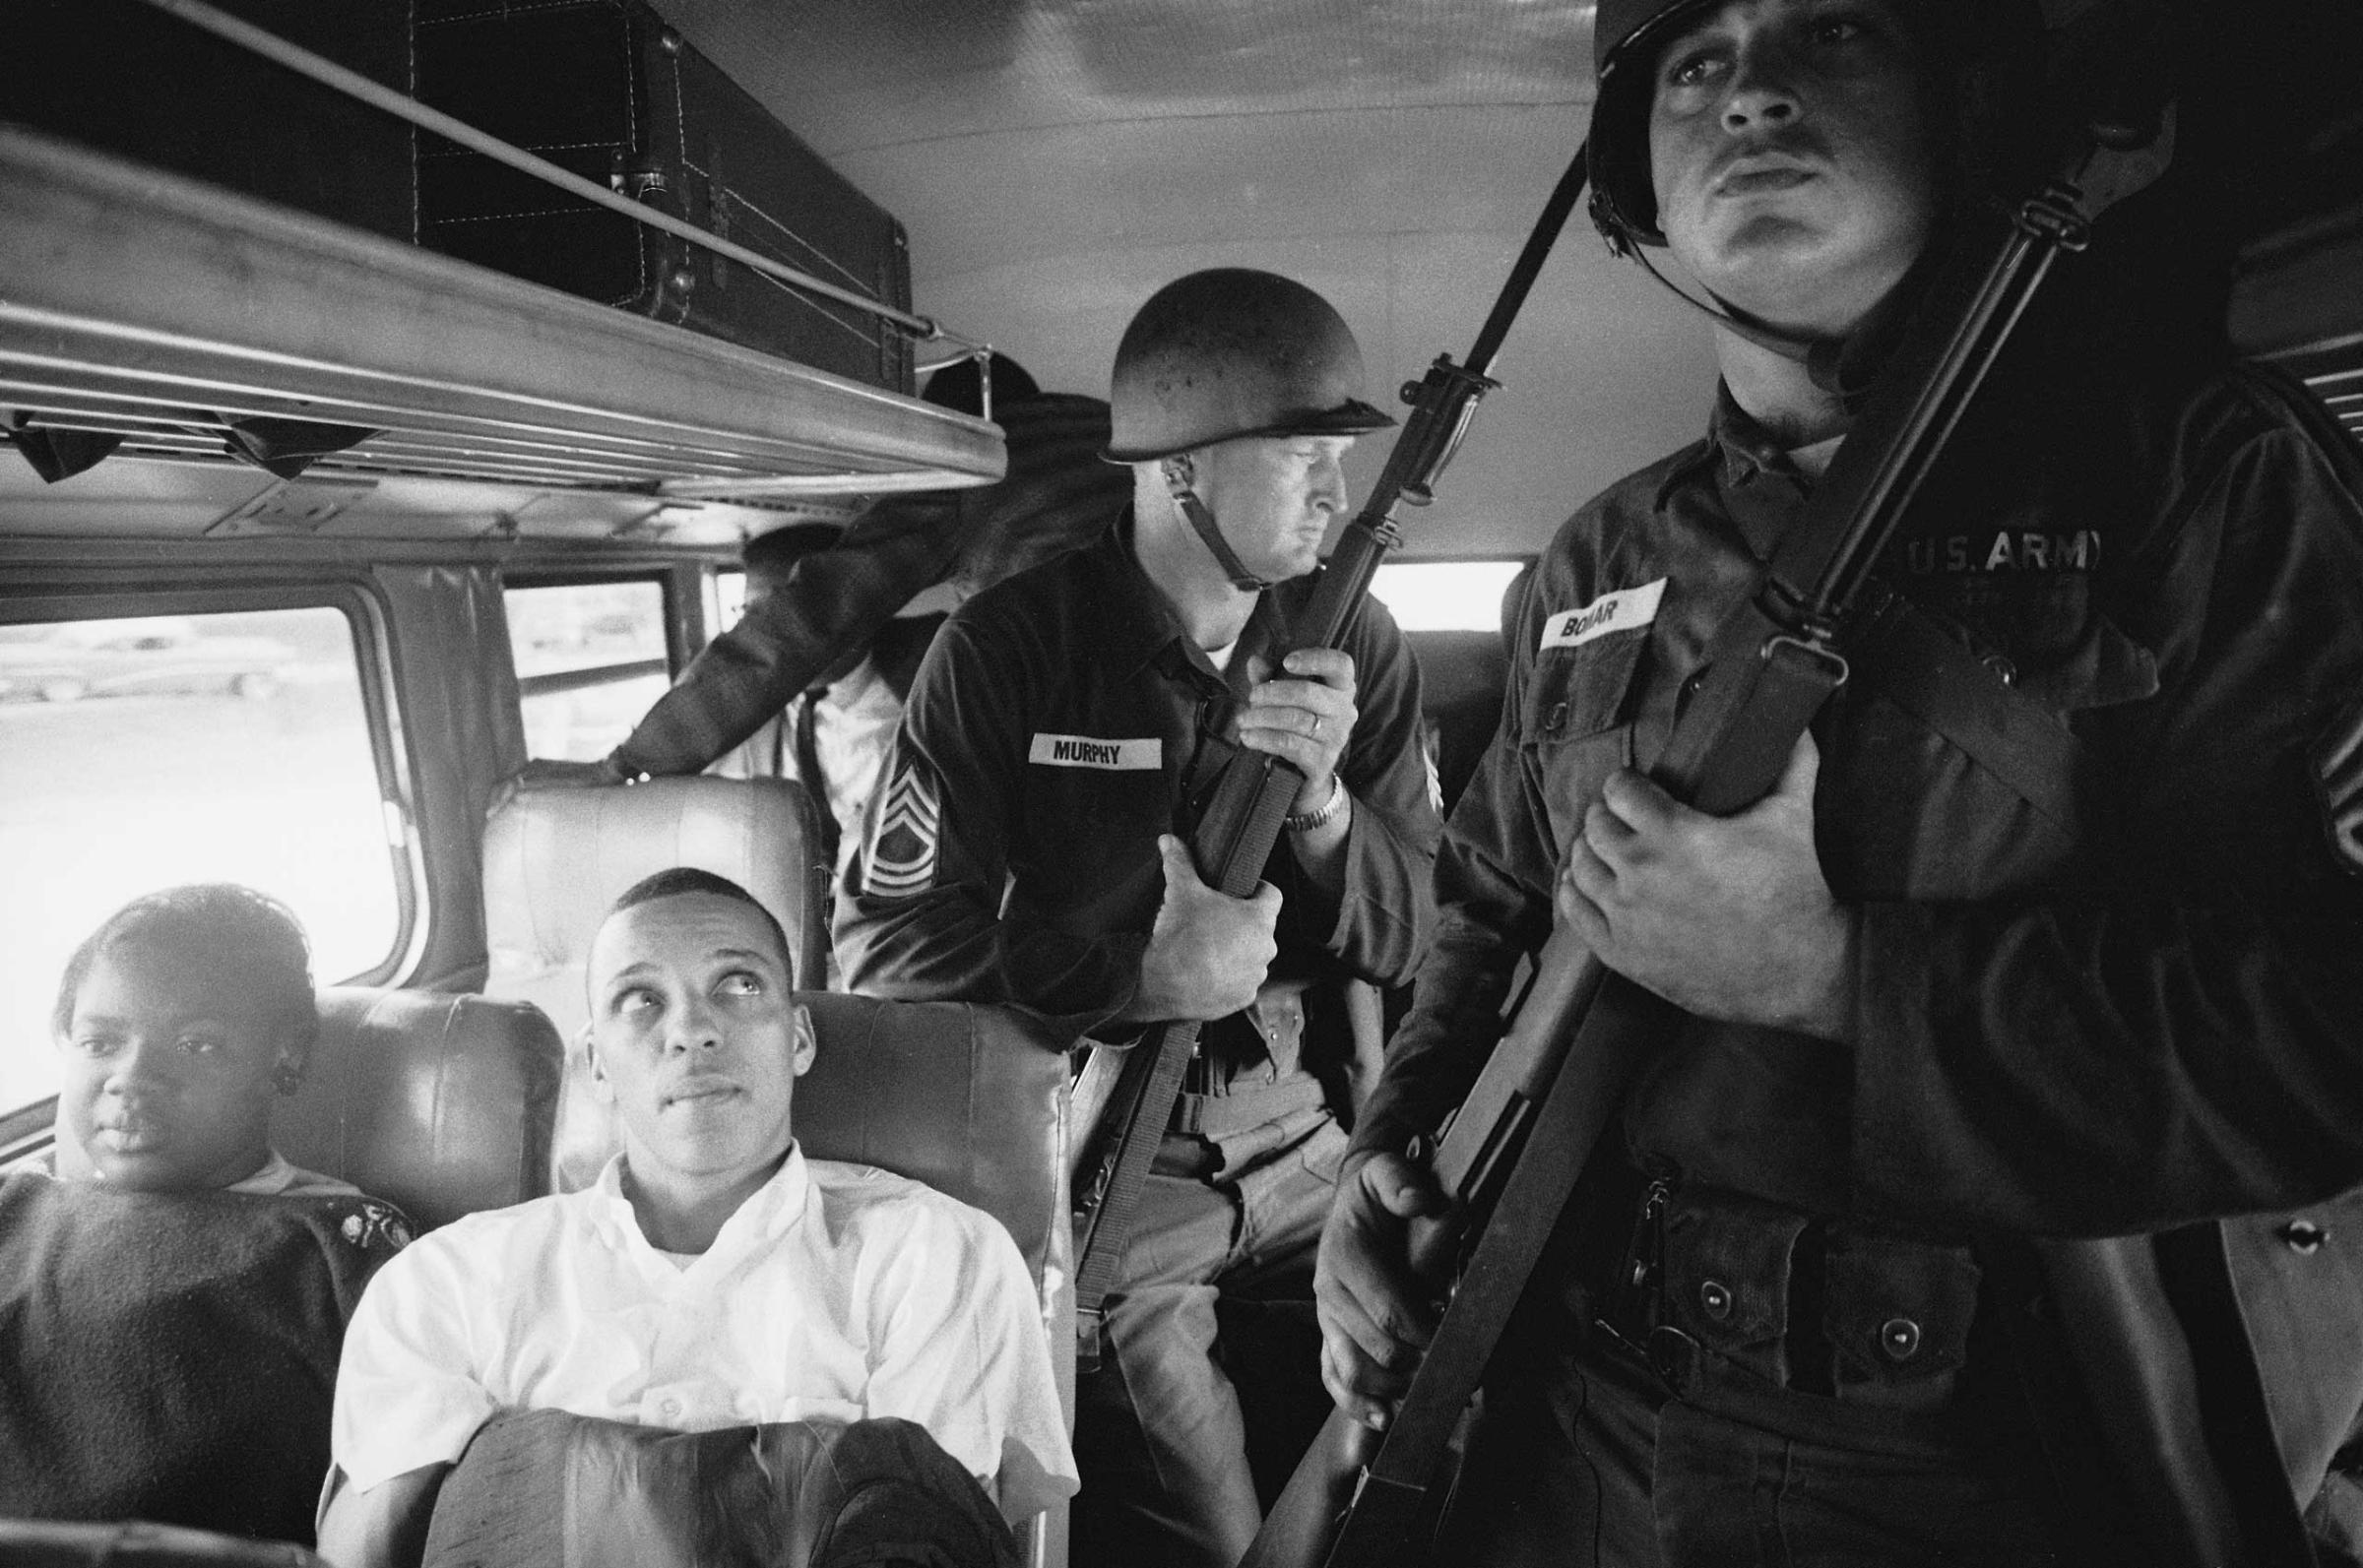 Freedom Riders Julia Aaron and David Dennis sit aboard an interstate bus as they and 25 other civil rights activists are escorted by Mississippi National Guardsmen on a violence-marred trip between Montgomery, Alabama, and Jackson, Mississippi. Originally published in the June 2, 1961, issue of LIFE.